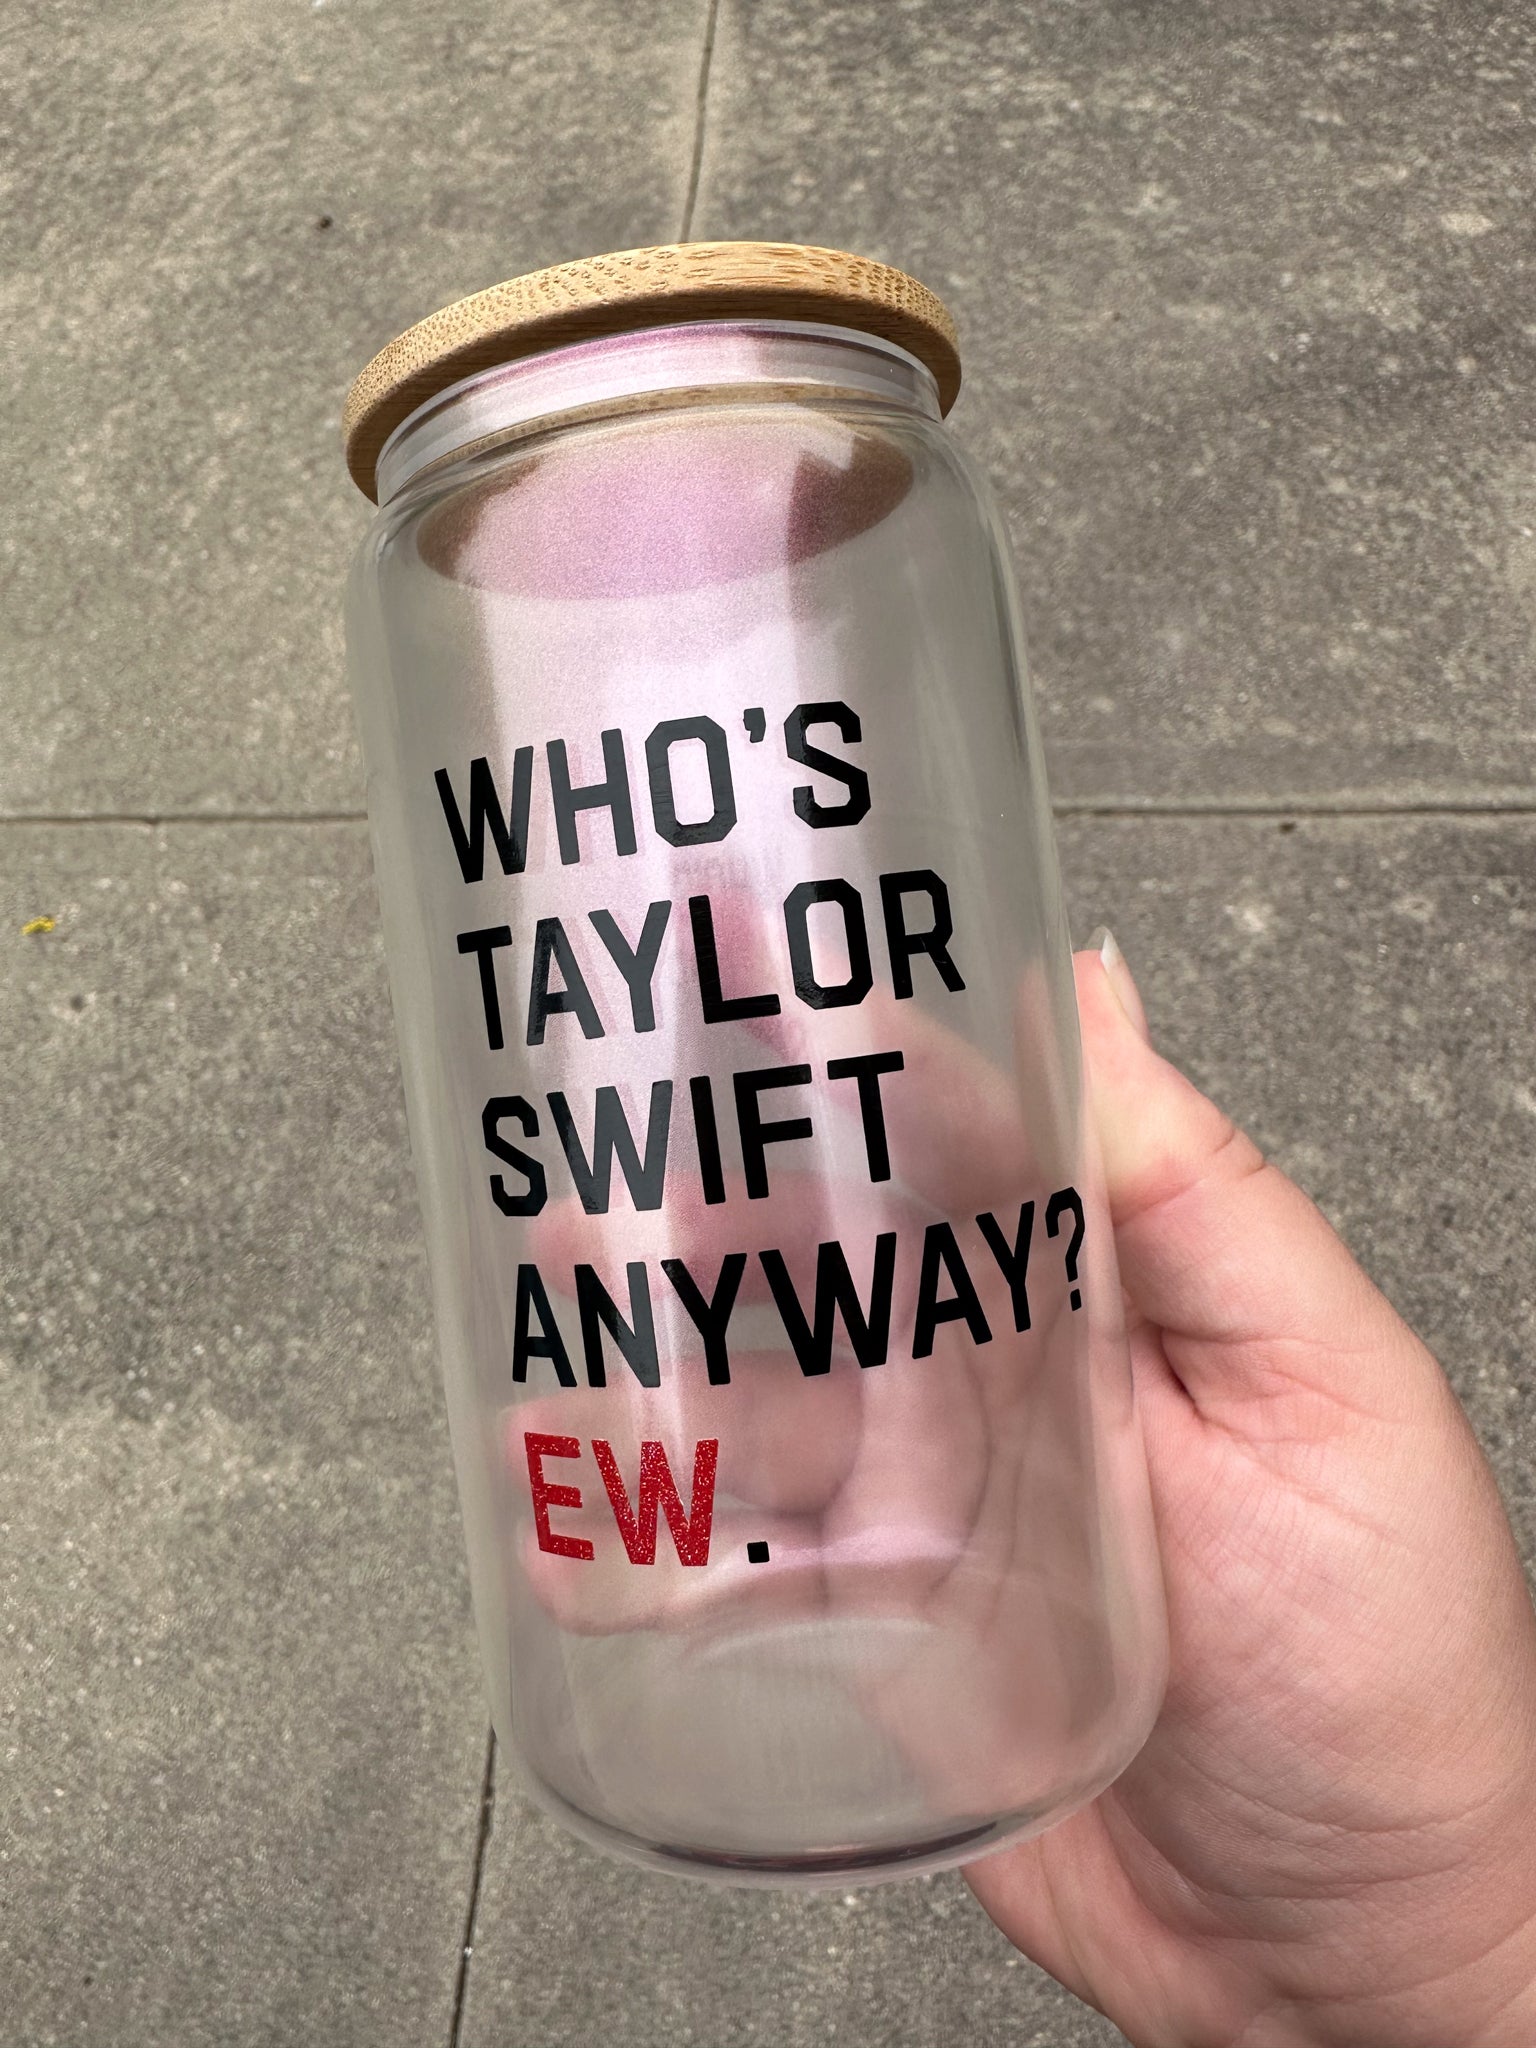 Taylor Swift Cup 1 Glassware 16oz